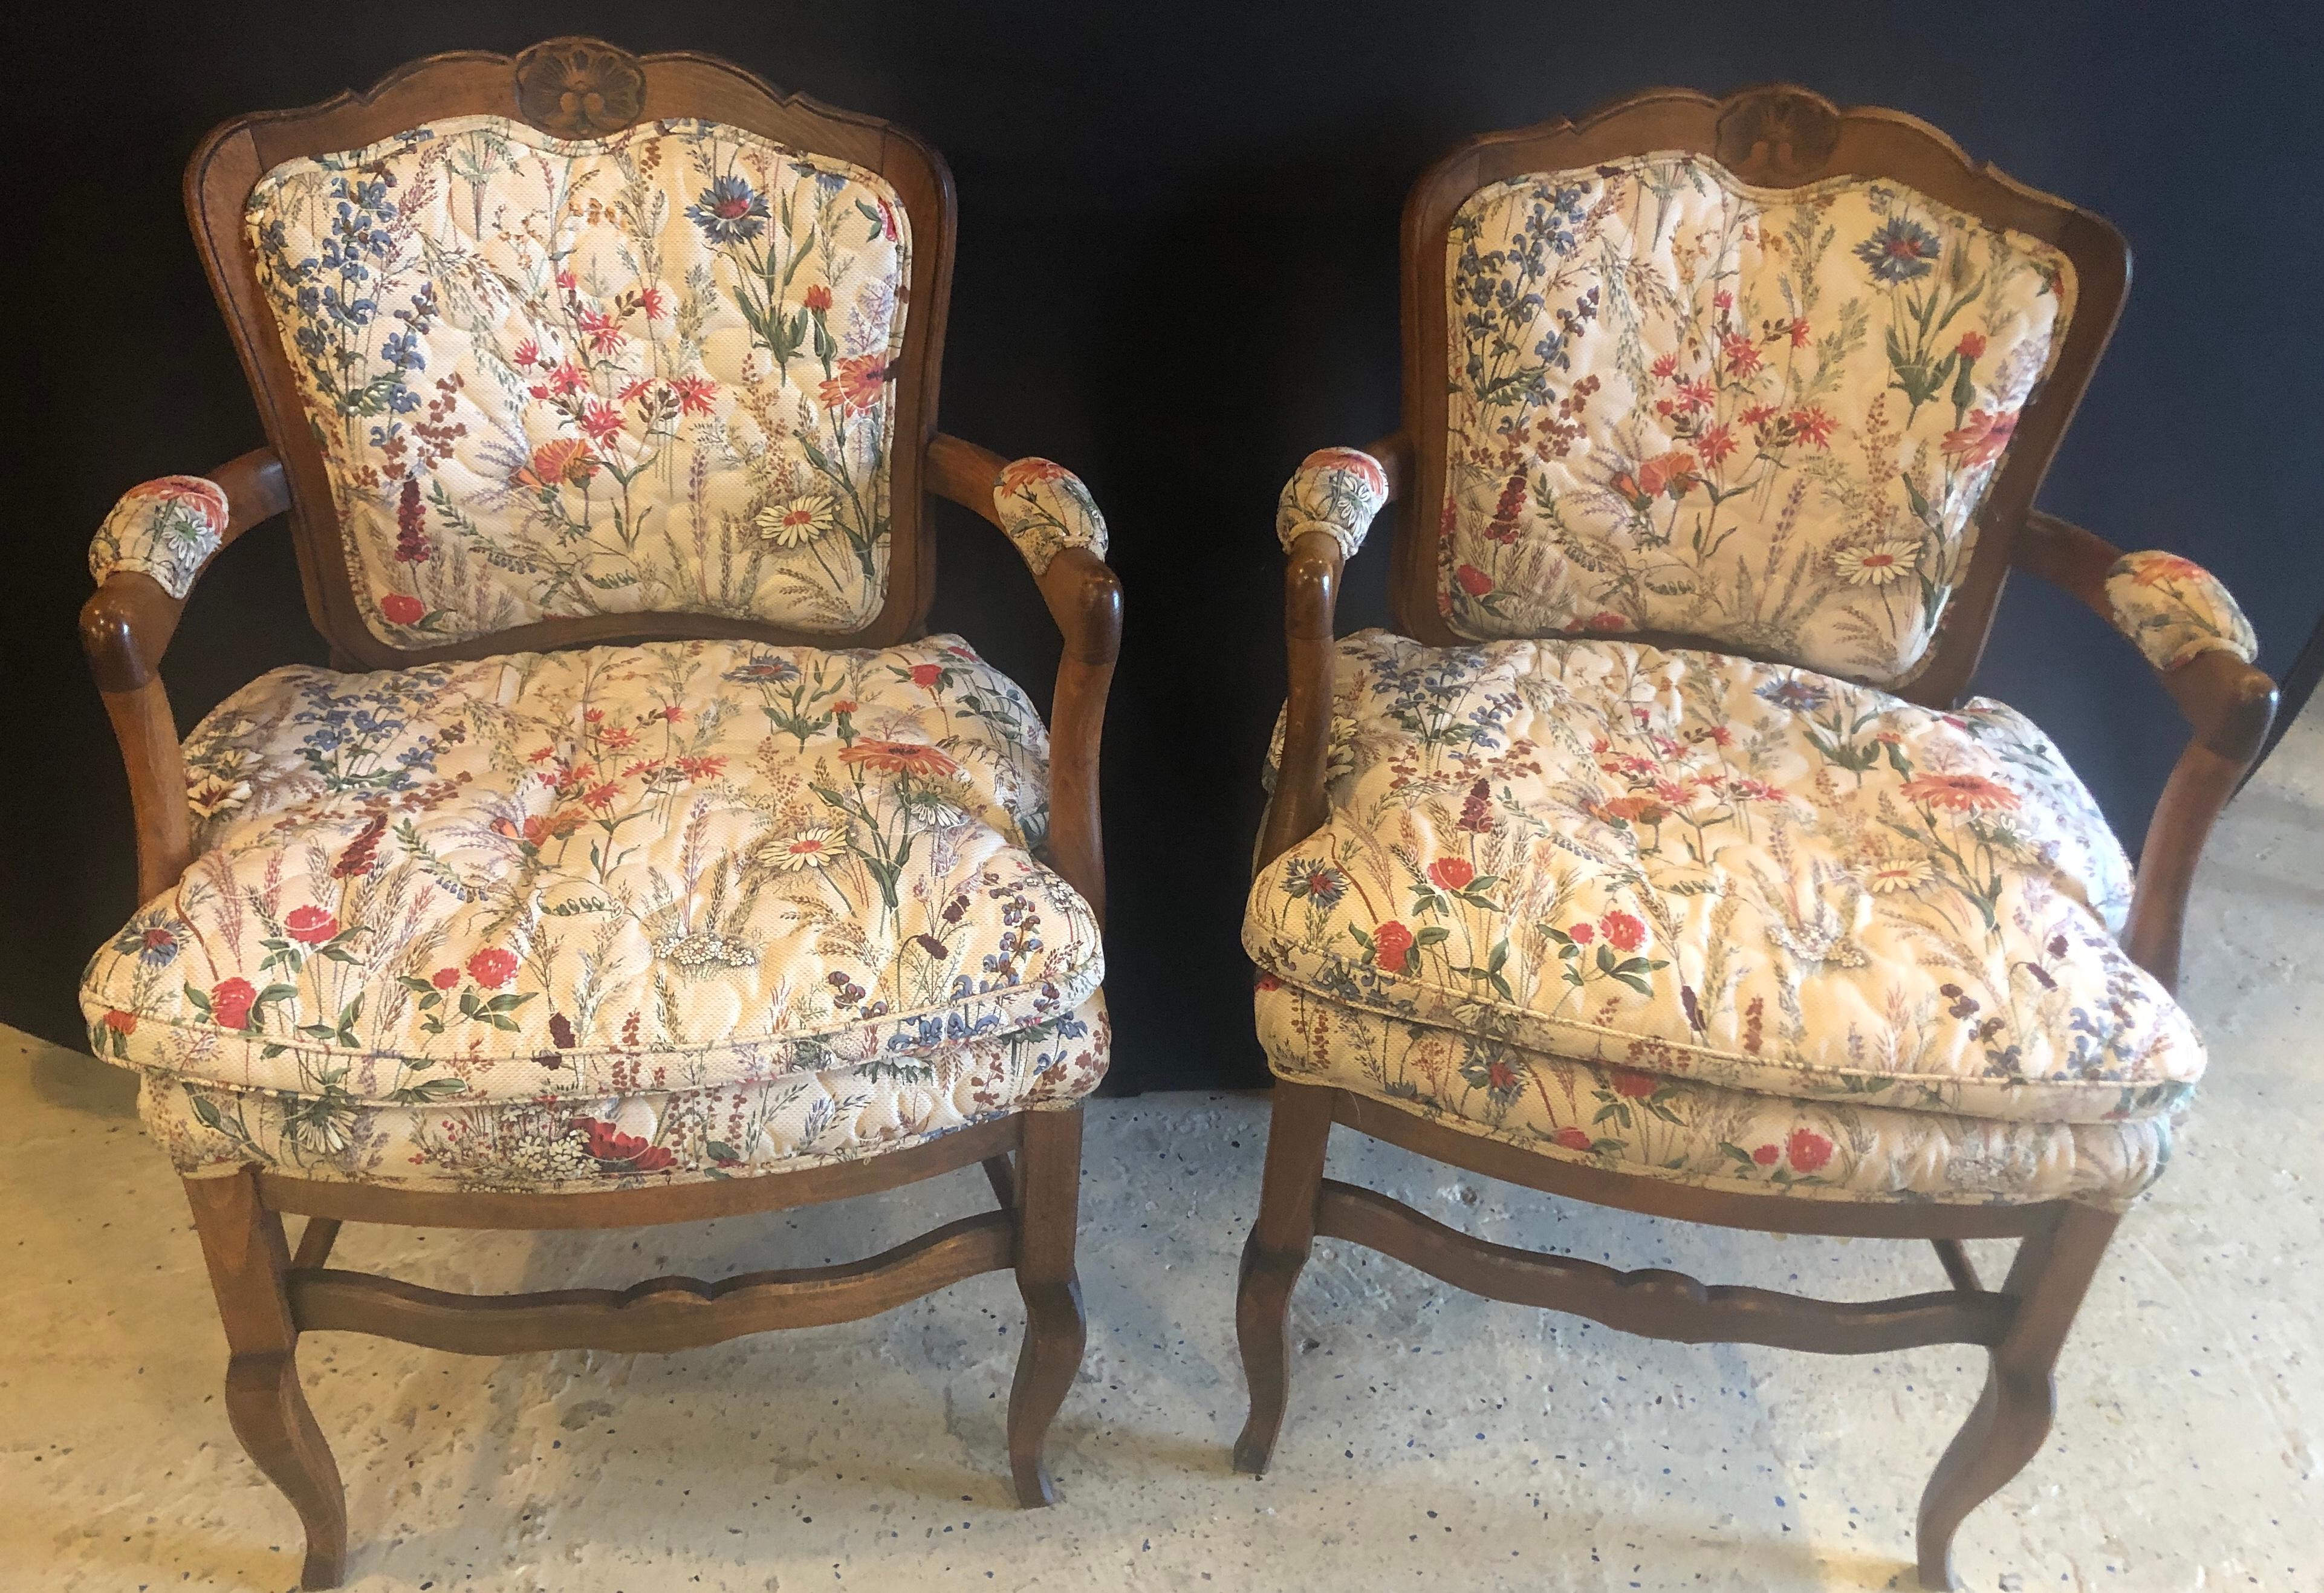 An elegant pair of country French boudoir Louis XI style fauteuils or armchairs. The chairs feature a hand-quilted upholstery and is made of walnut wood. The off -while floral print will brighten and add statement to any living environment.